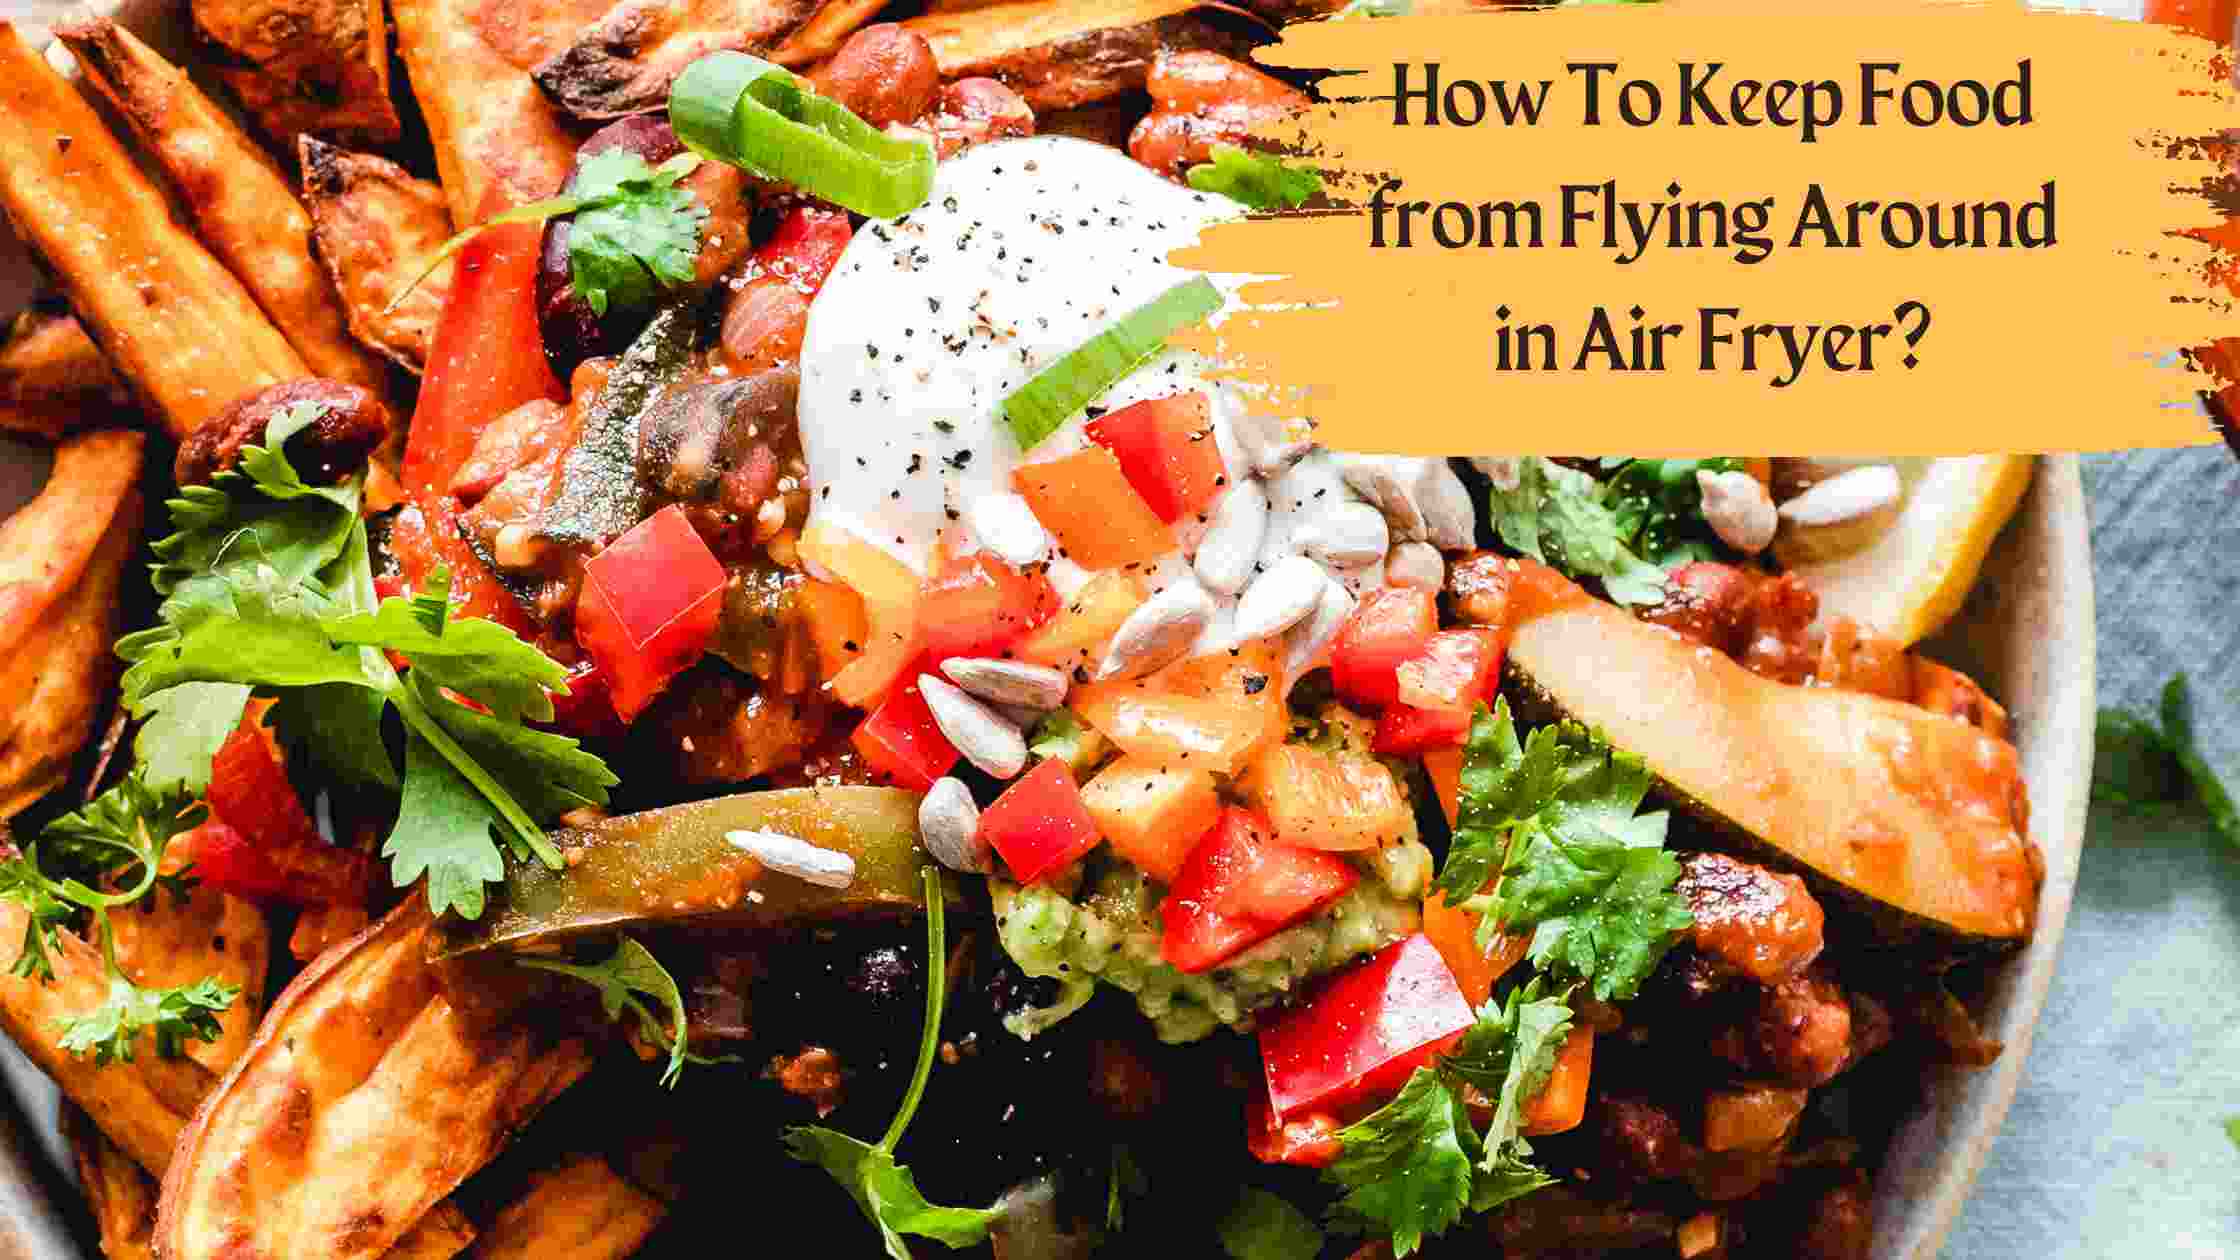 How To Keep Food from Flying Around in Air Fryer